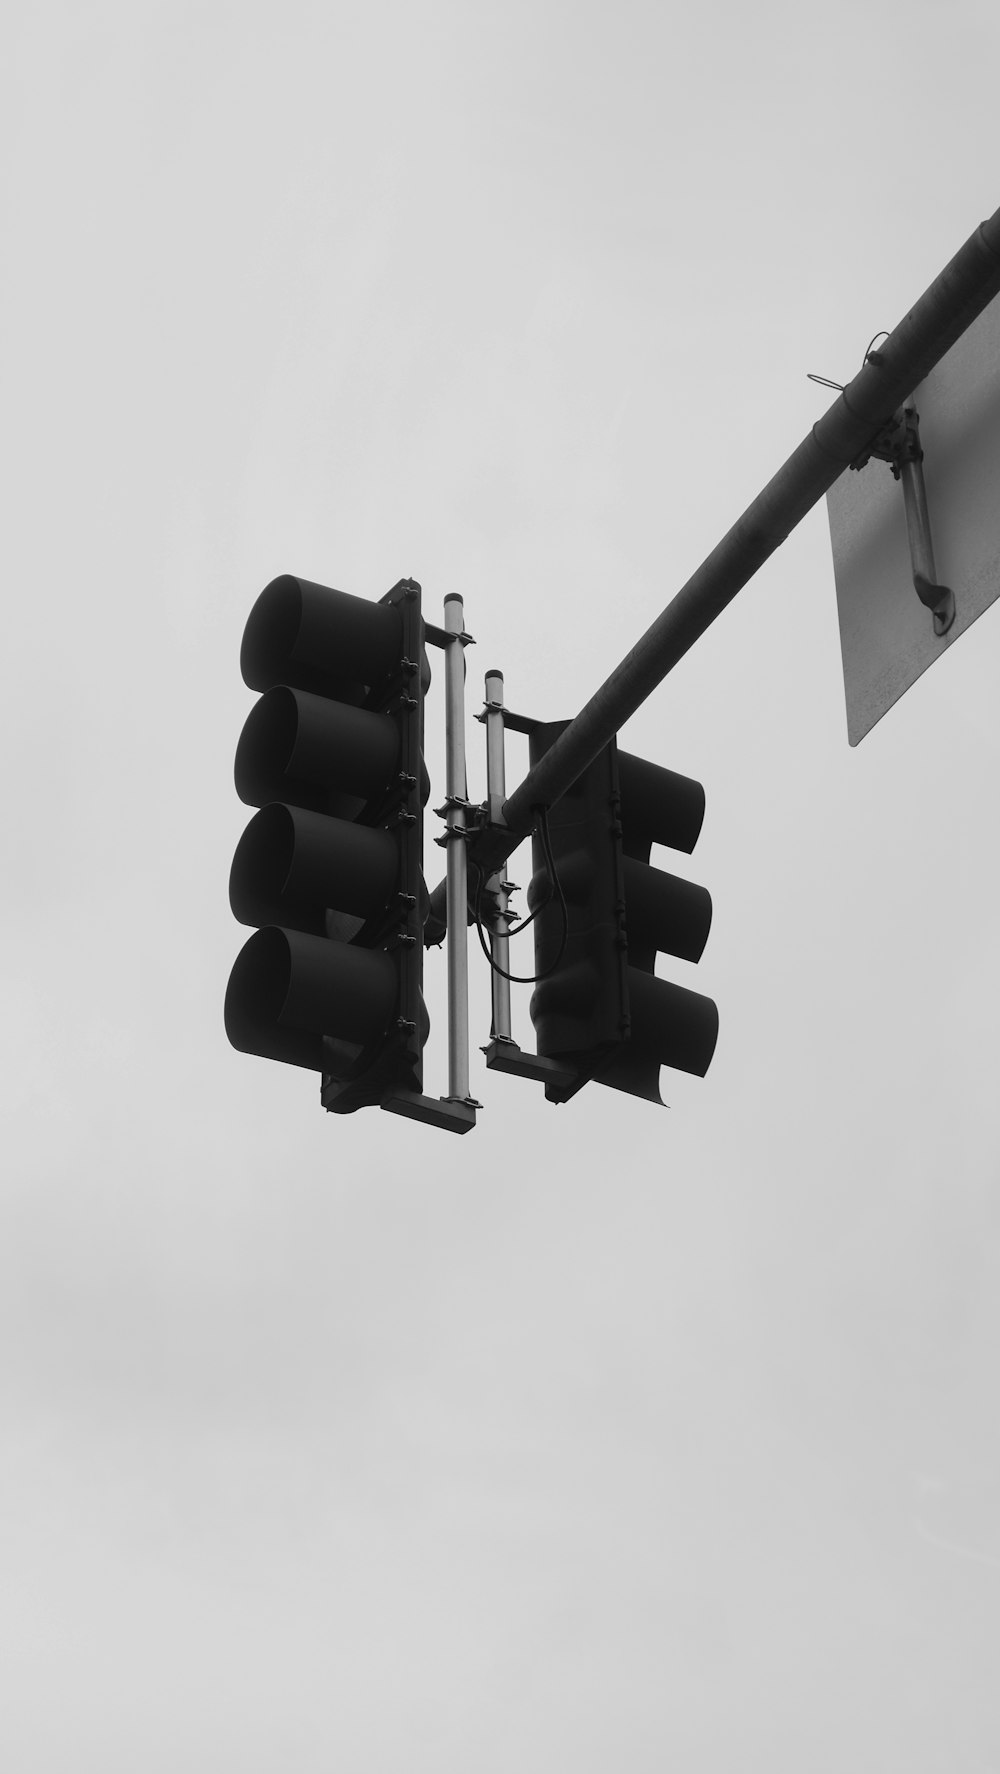 a black and white photo of a traffic light